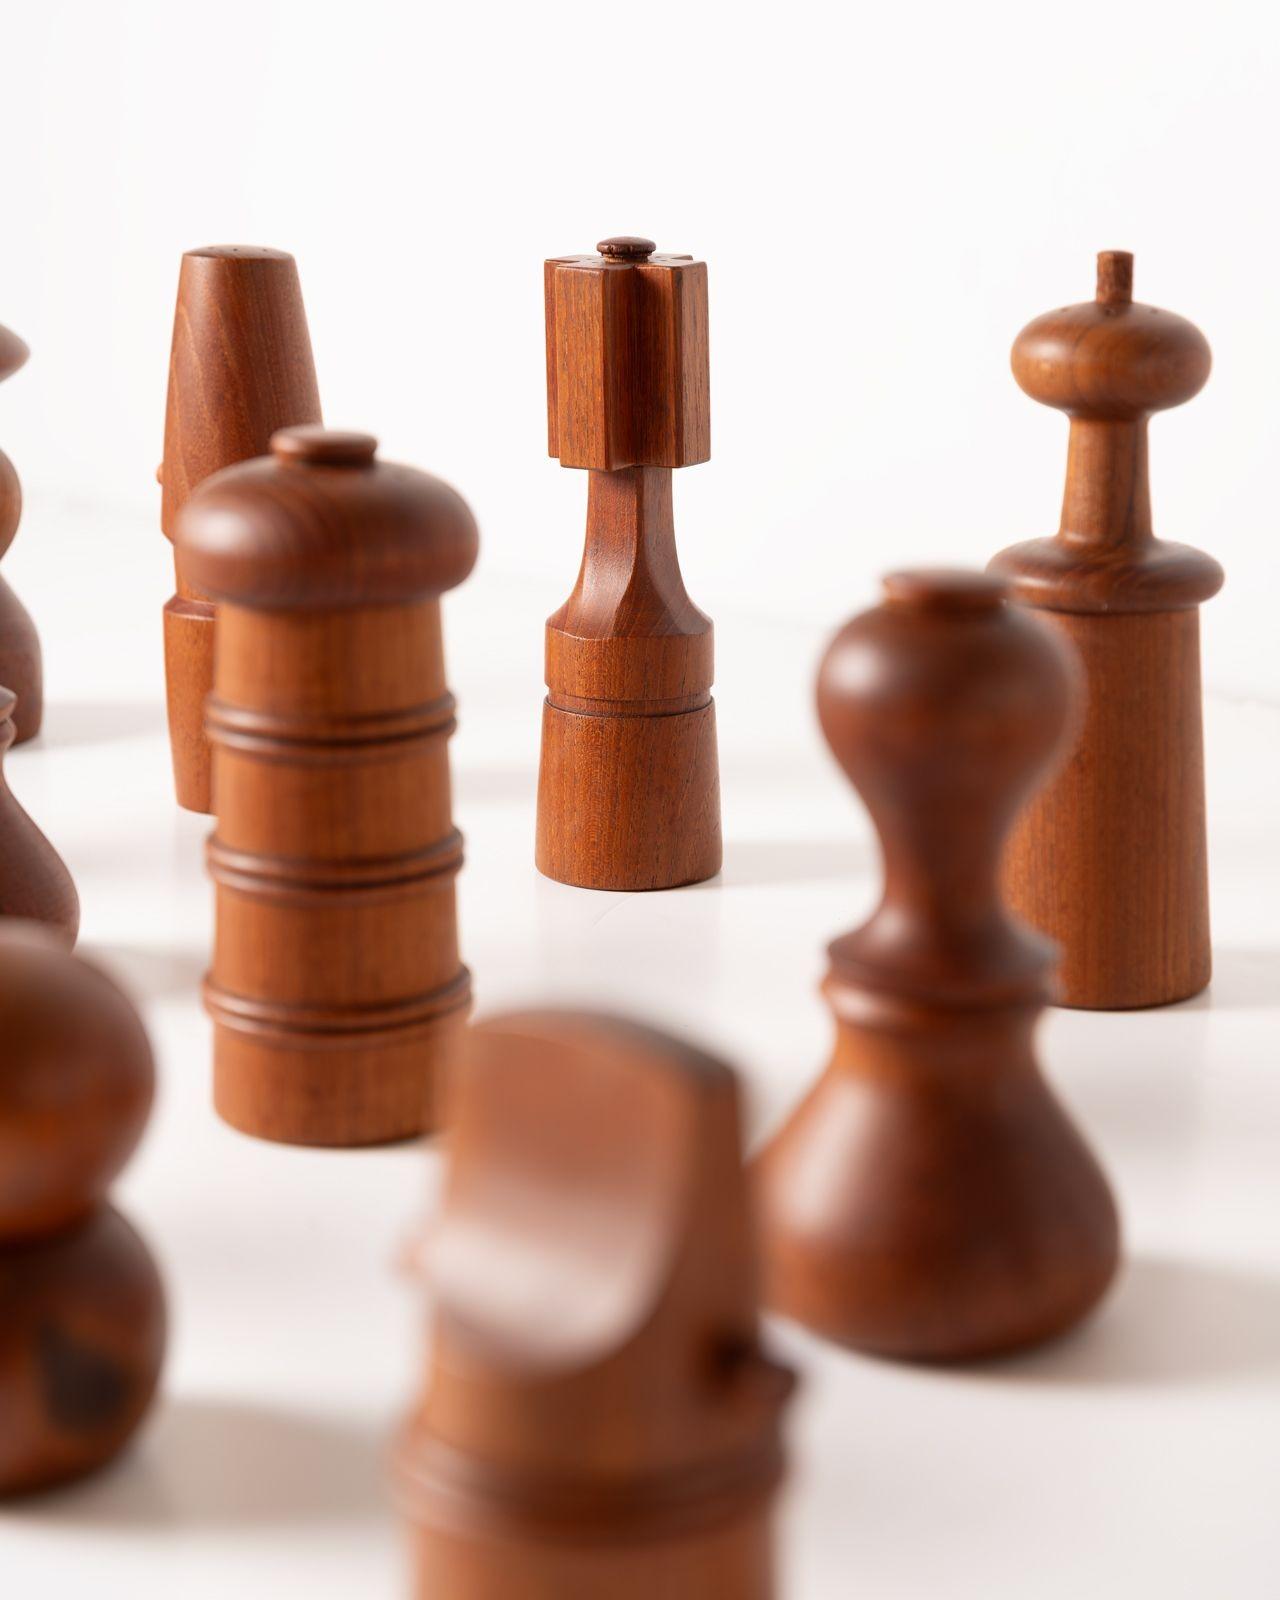 Steel Dansk Pepper Mills by Jens Quistgaard - A Curated Collection of 17 For Sale